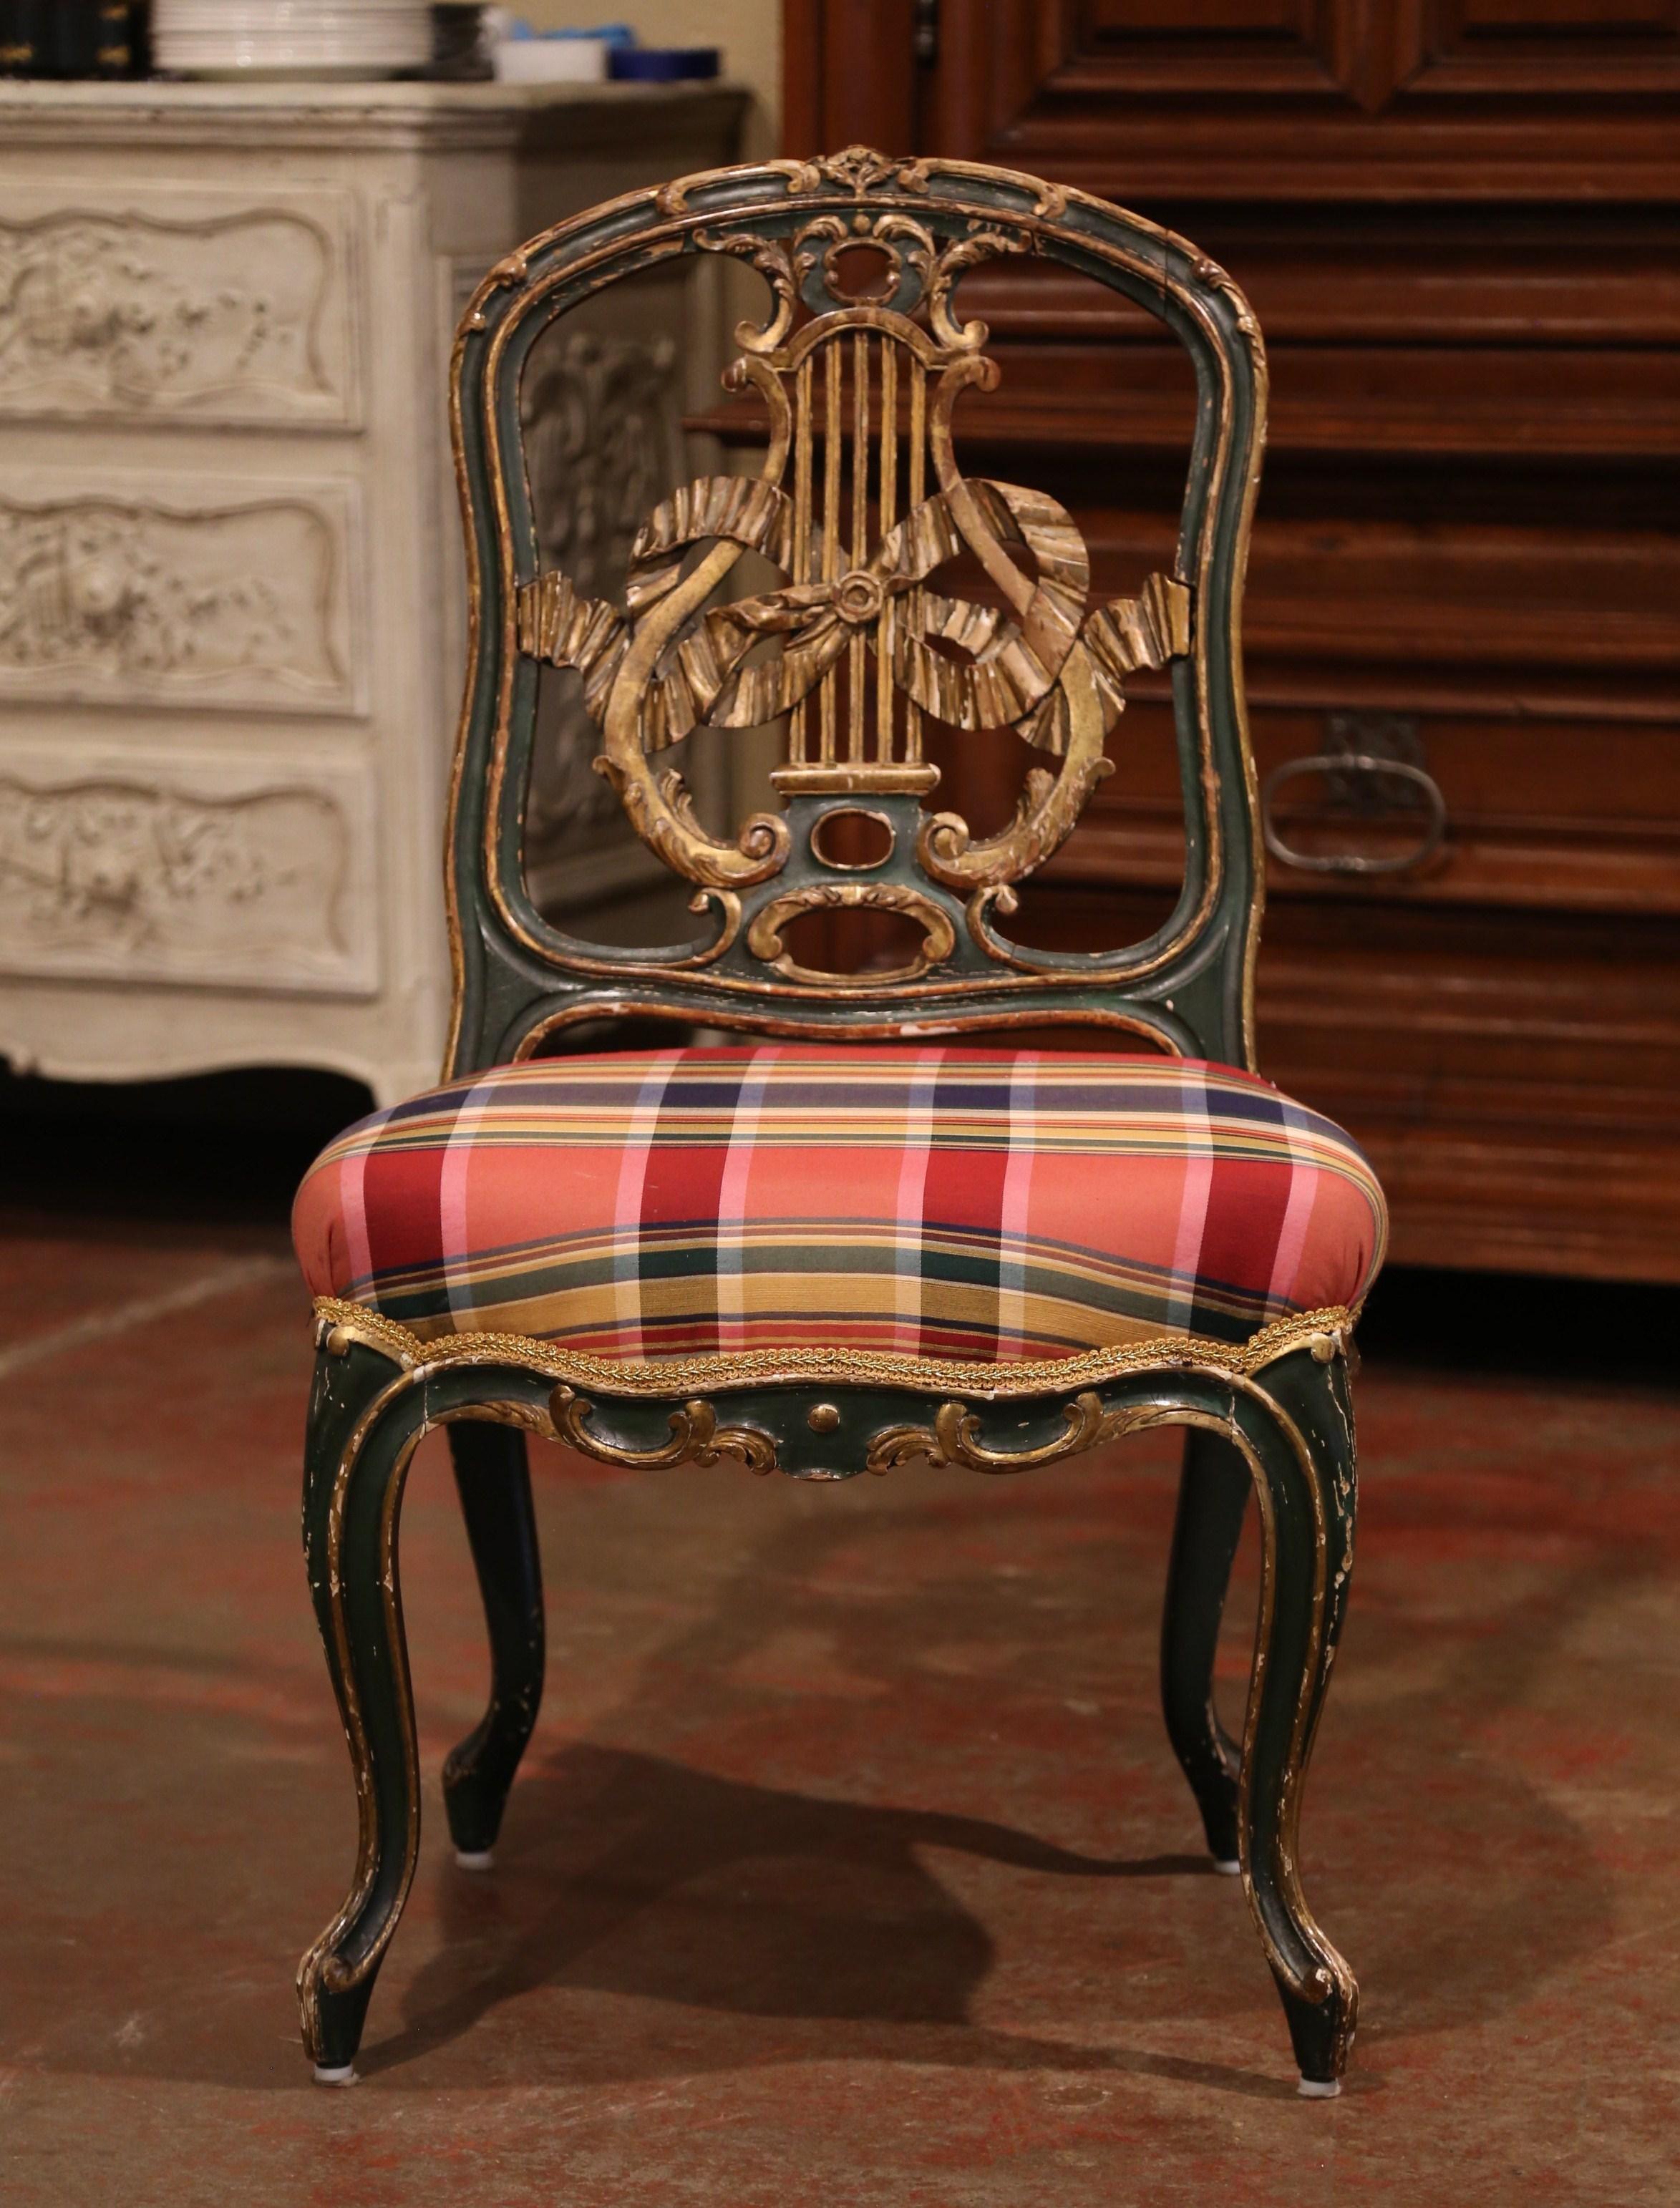 Decorate a master bathroom with this elegant antique chair; crafted in France circa 1870, the decorative chair stands on cabriole legs over a scalloped apron. The piece features wonderful carvings on the back including lyre and traditional ribbon